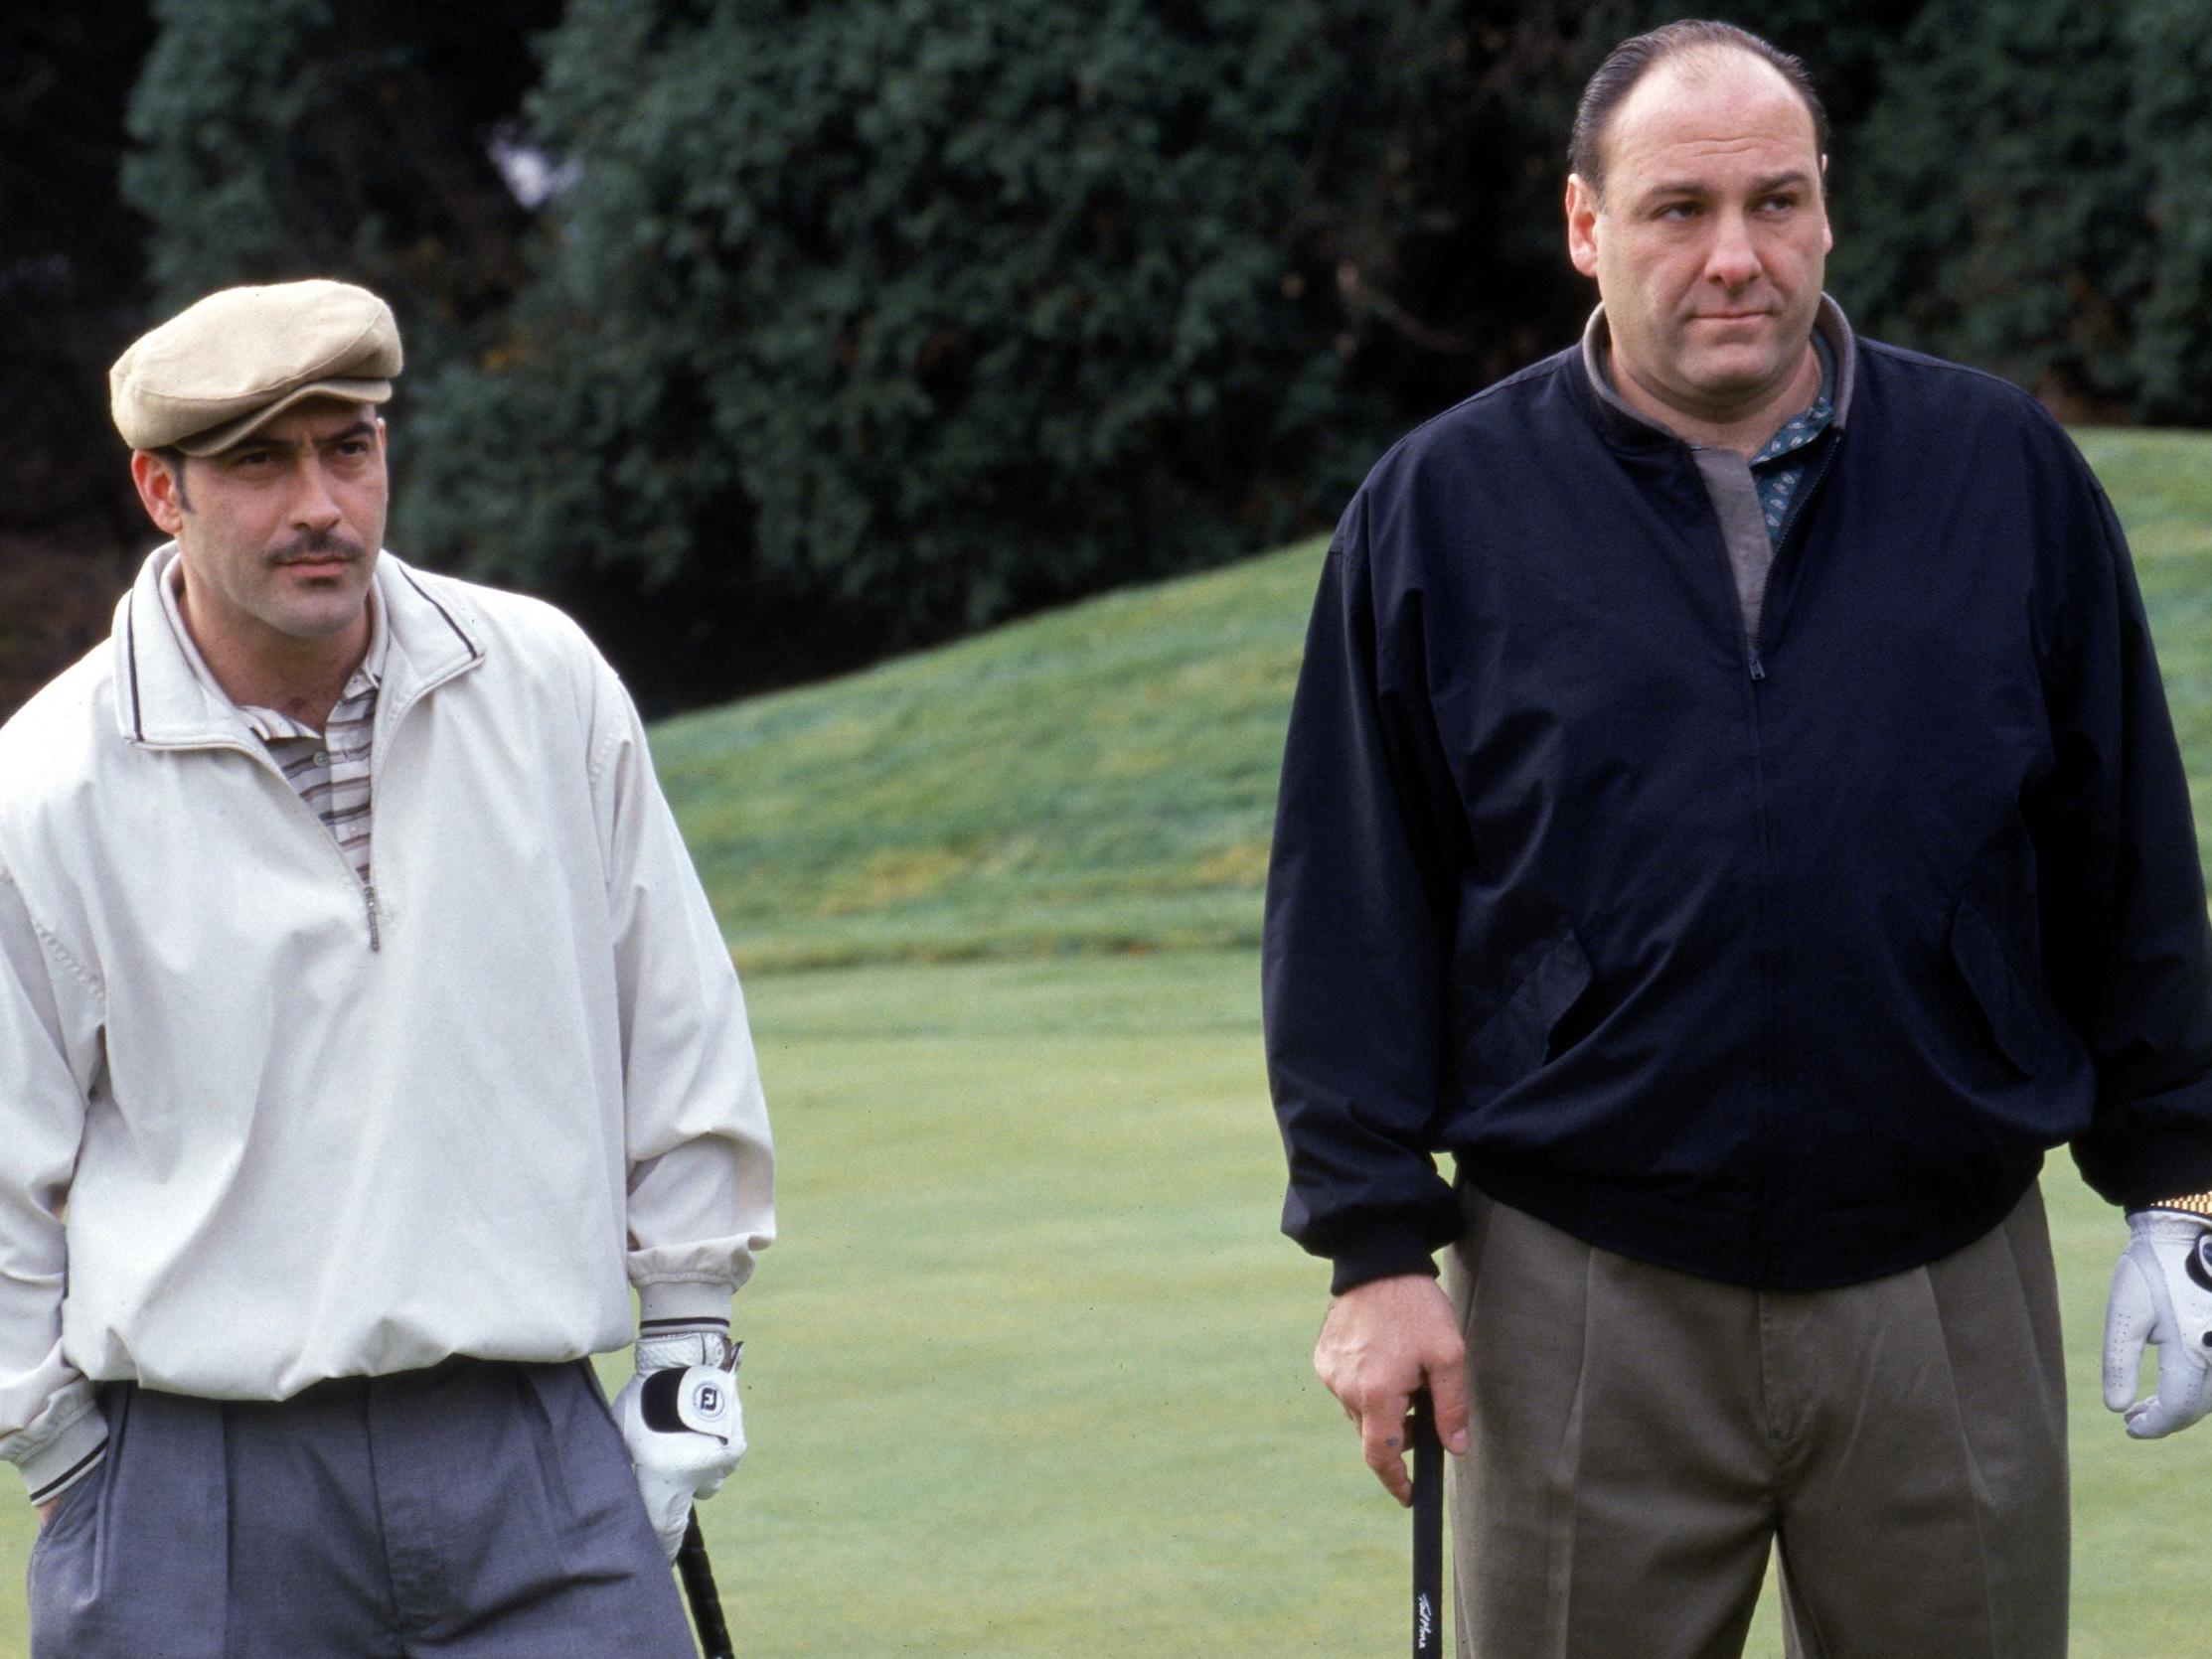 ‘The Sopranos’, which starred James Gandolfini, revolutionised the medium of TV when it debuted in 1999